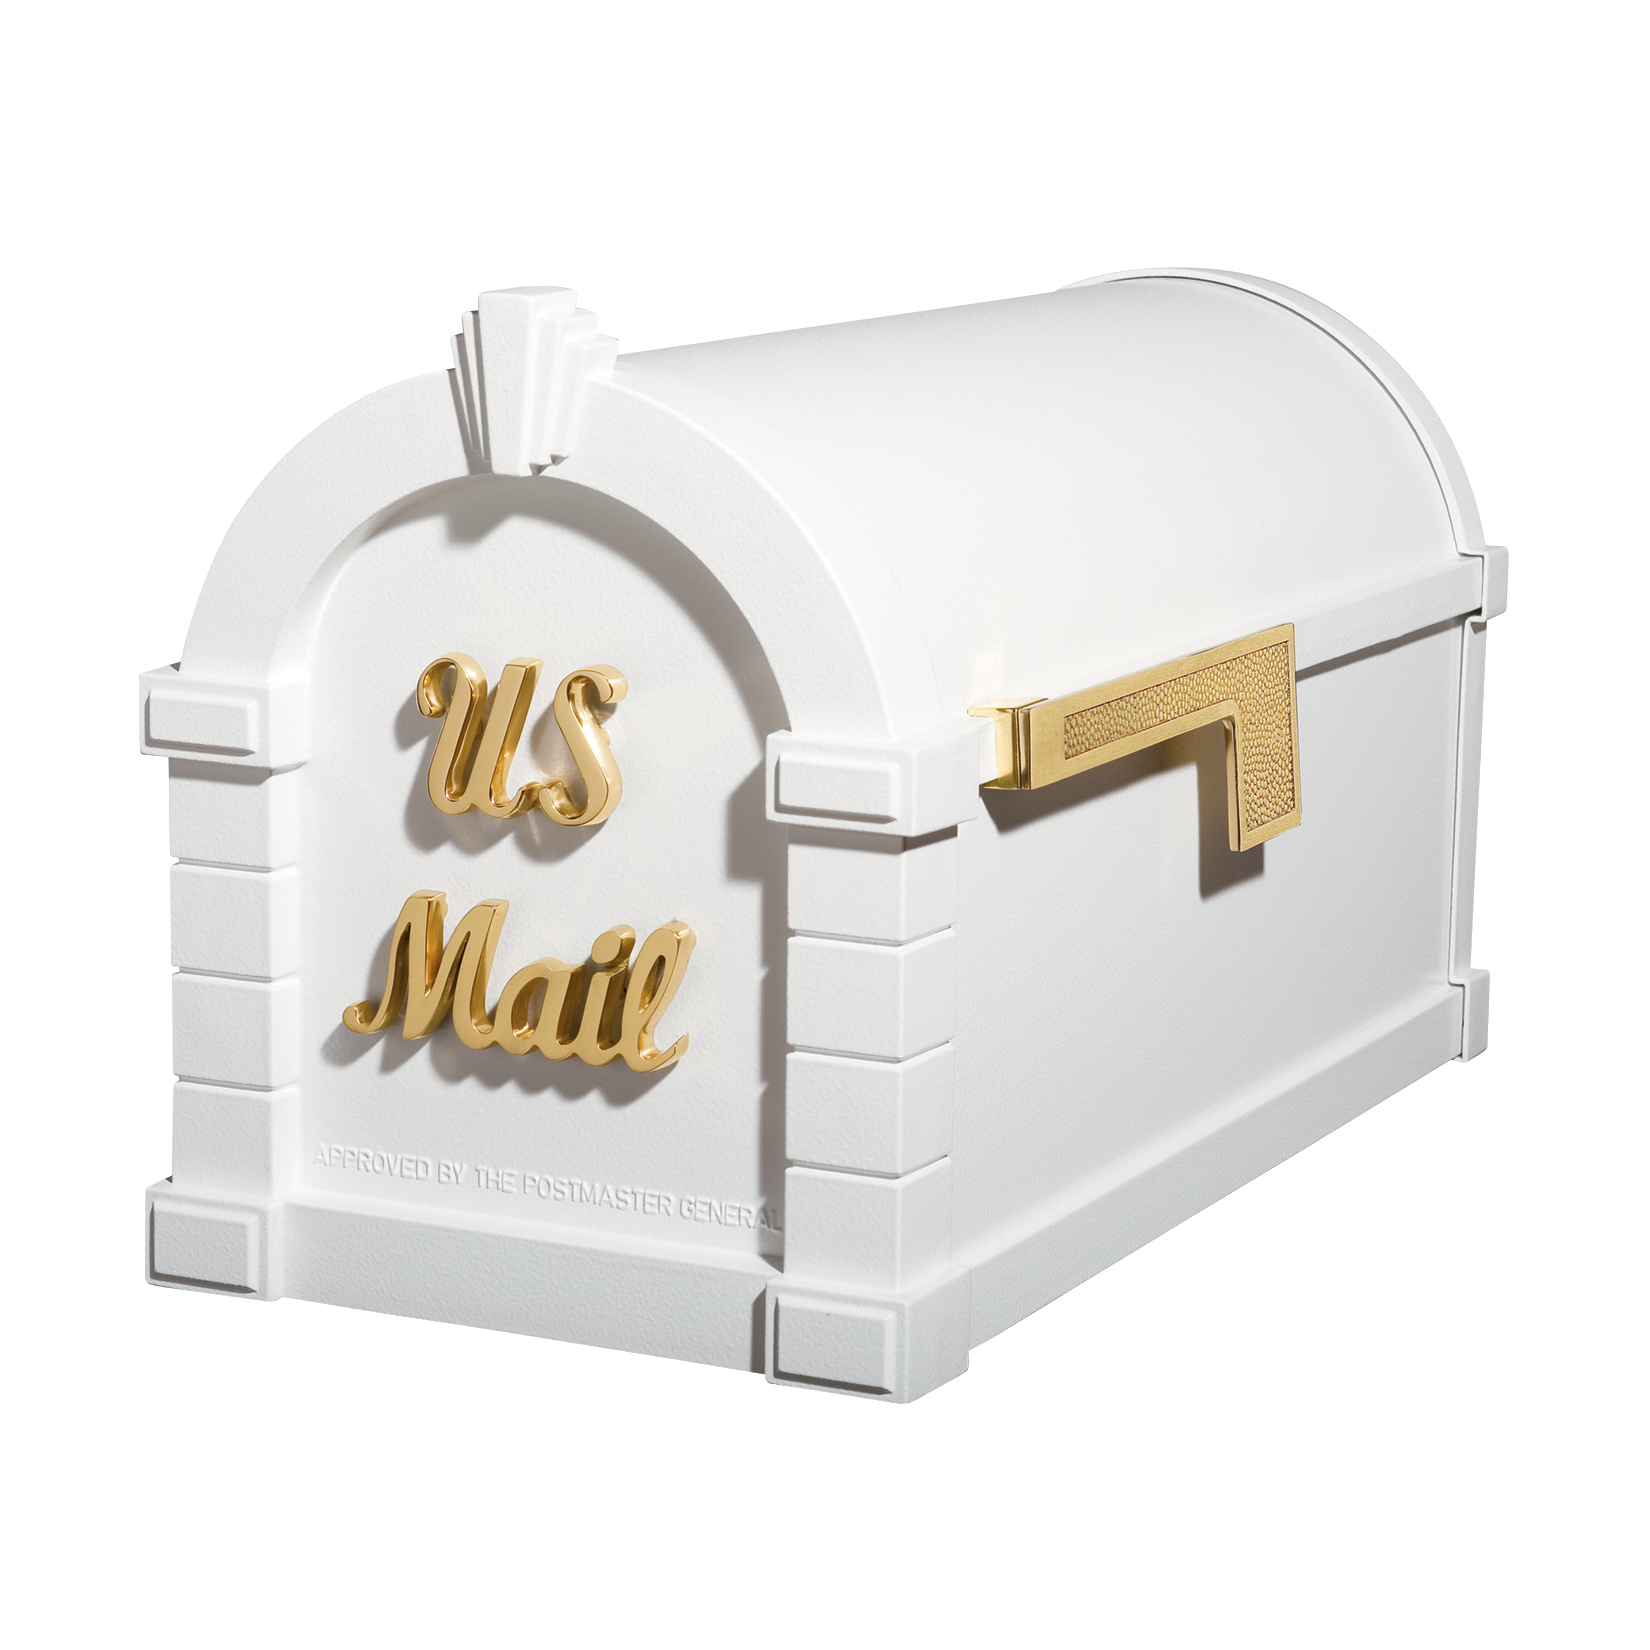 Gaines Signature Keystone Mailboxes - White with Polished Brass